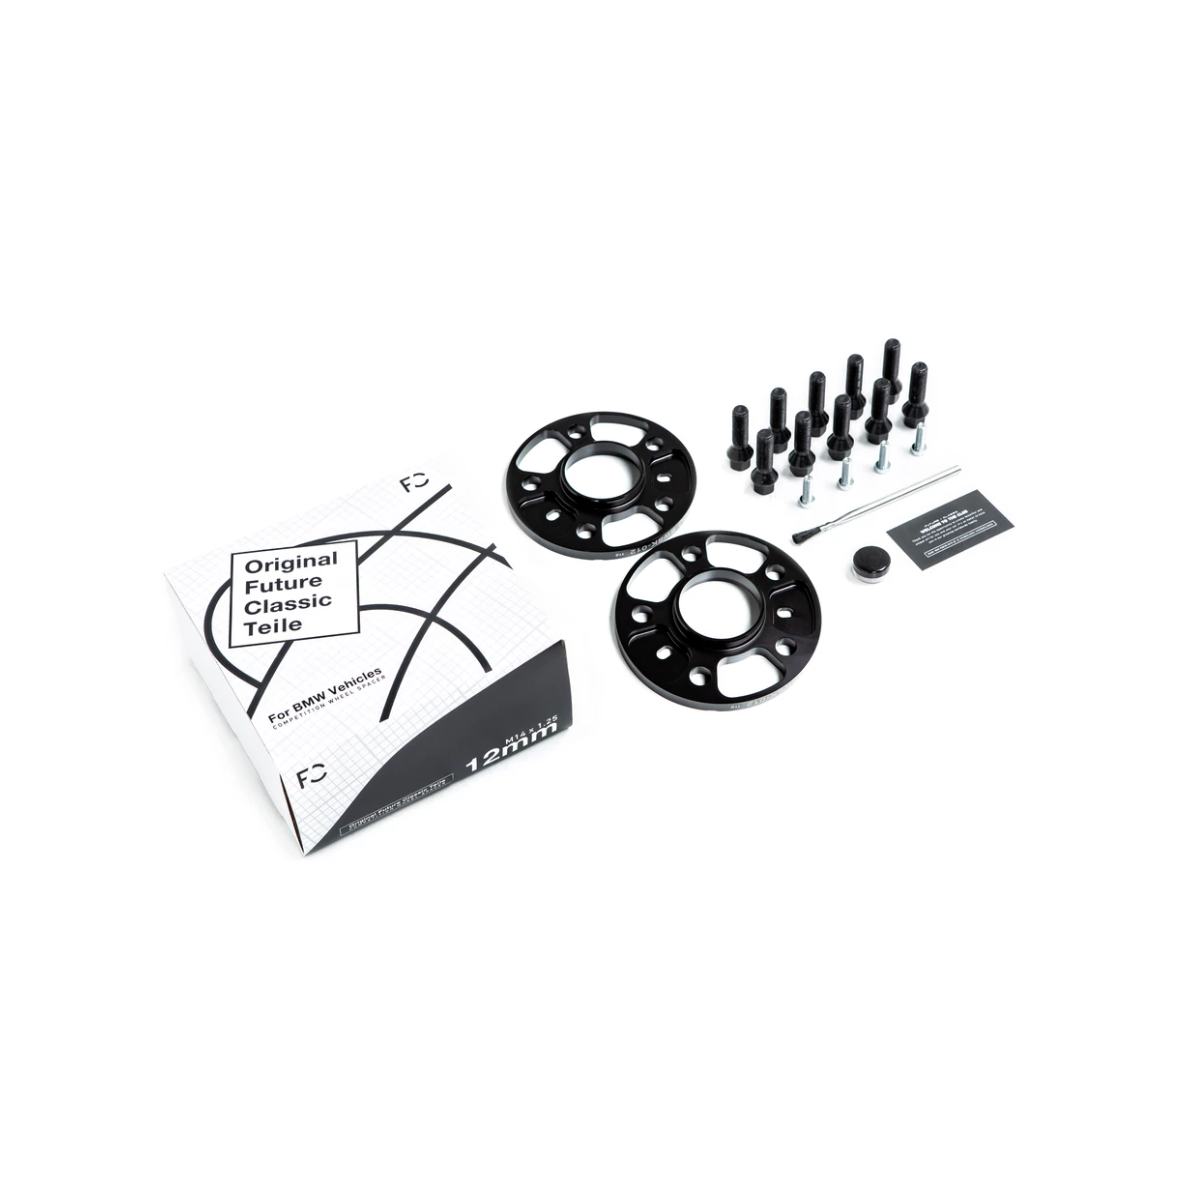 Future Classic - A90 5x112 Wheel Spacer Kit